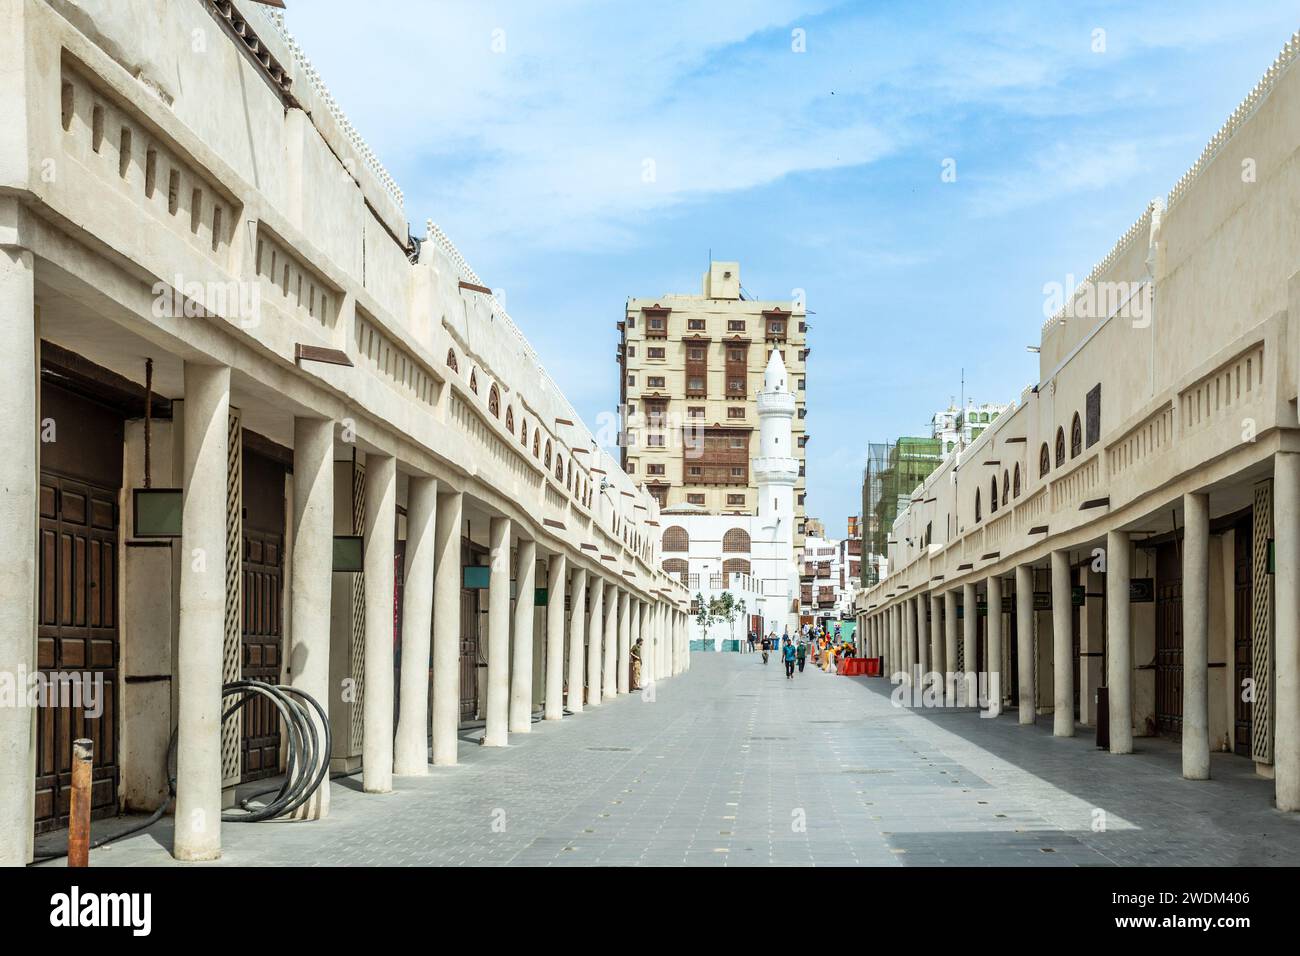 Al-Balad old town central walking street with traditional muslim and mosque, Jeddah, Saudi Arabia Stock Photo